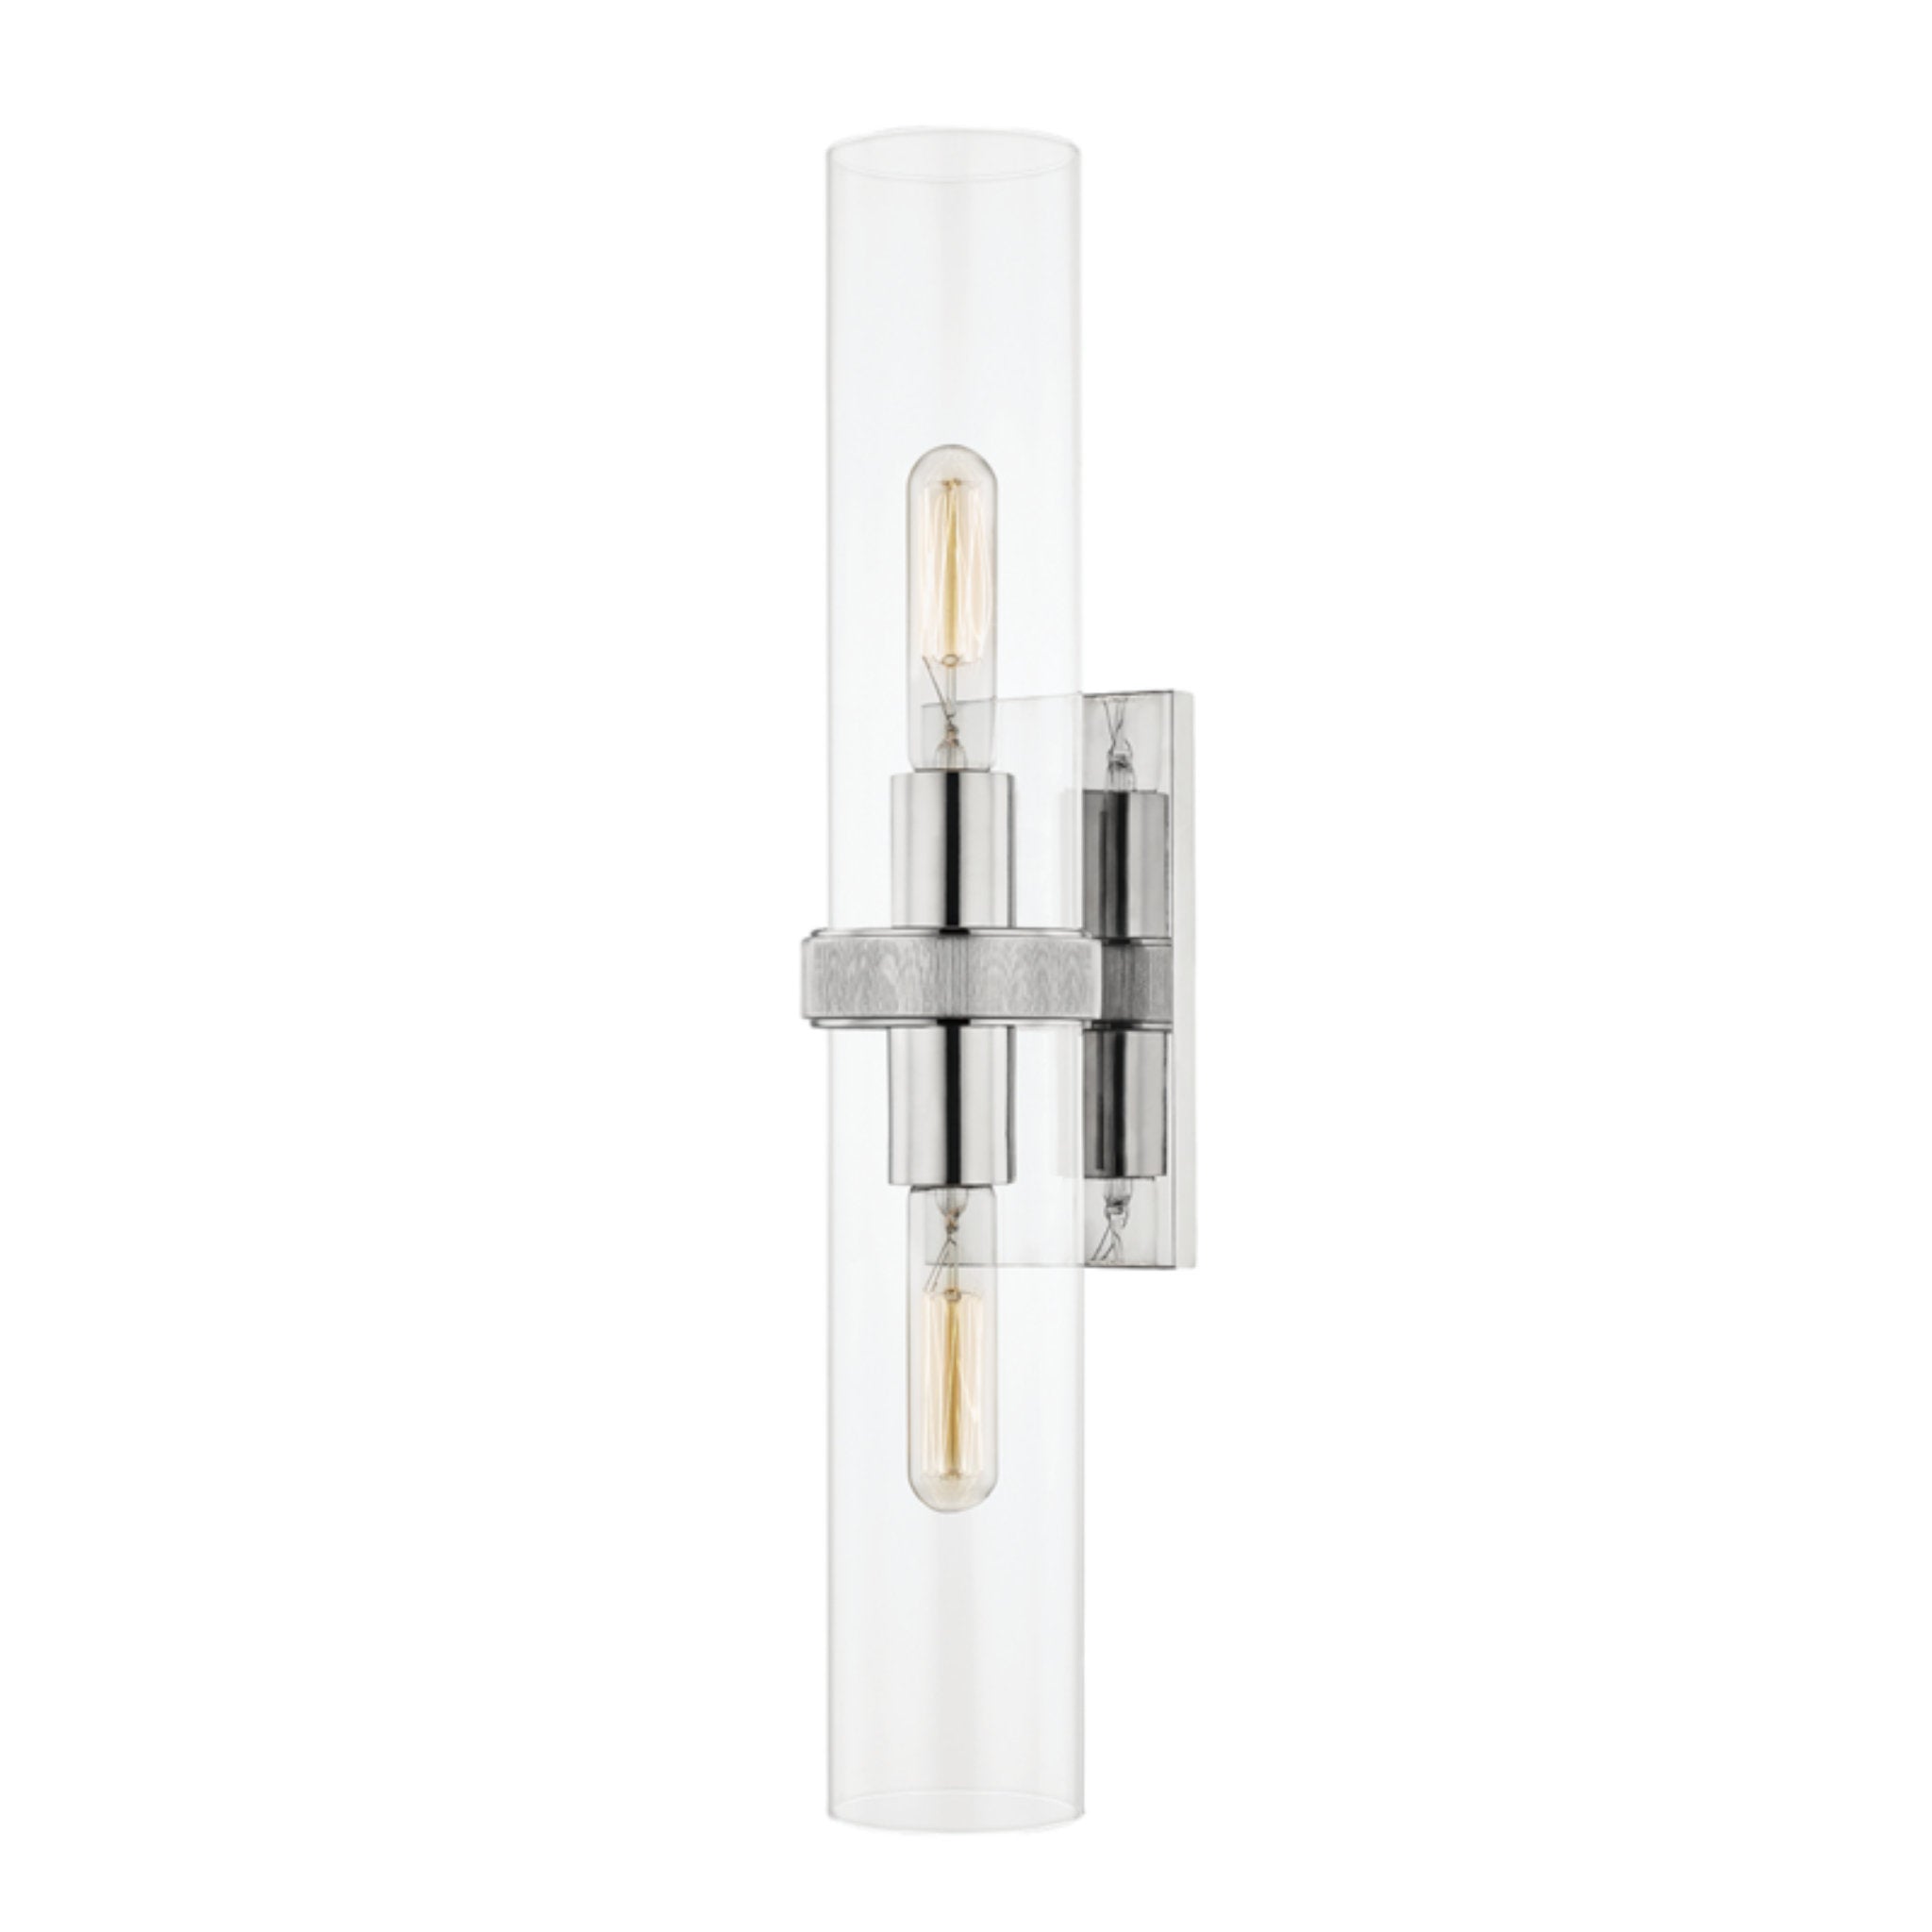 Briggs 2 Light Wall Sconce in Polished Nickel